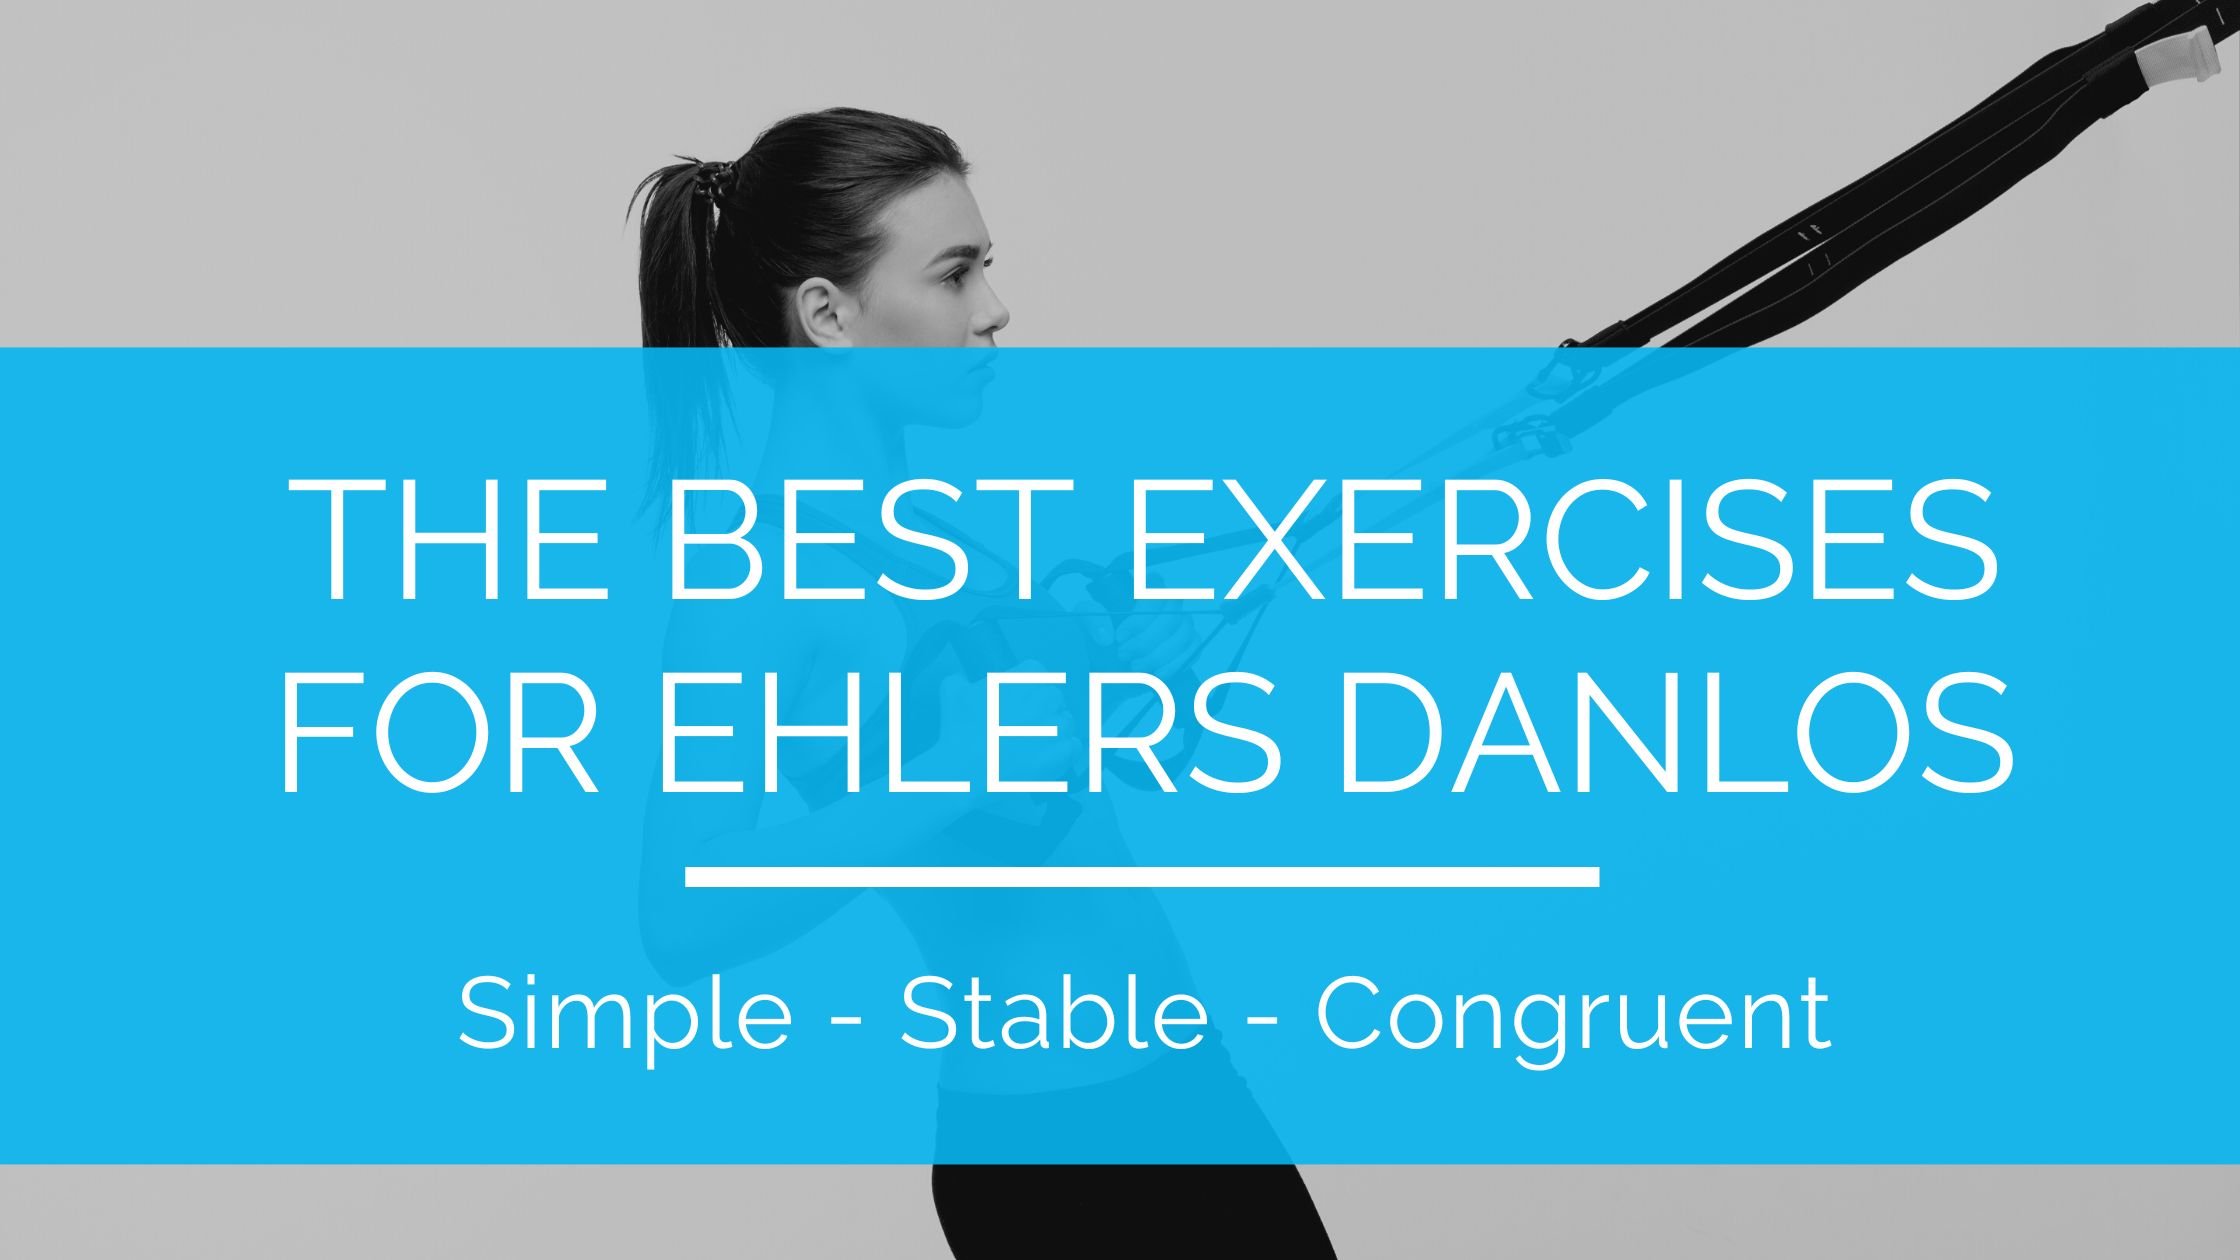 The Best Exercises for Ehlers Danlos Simple - Stable- Congruent